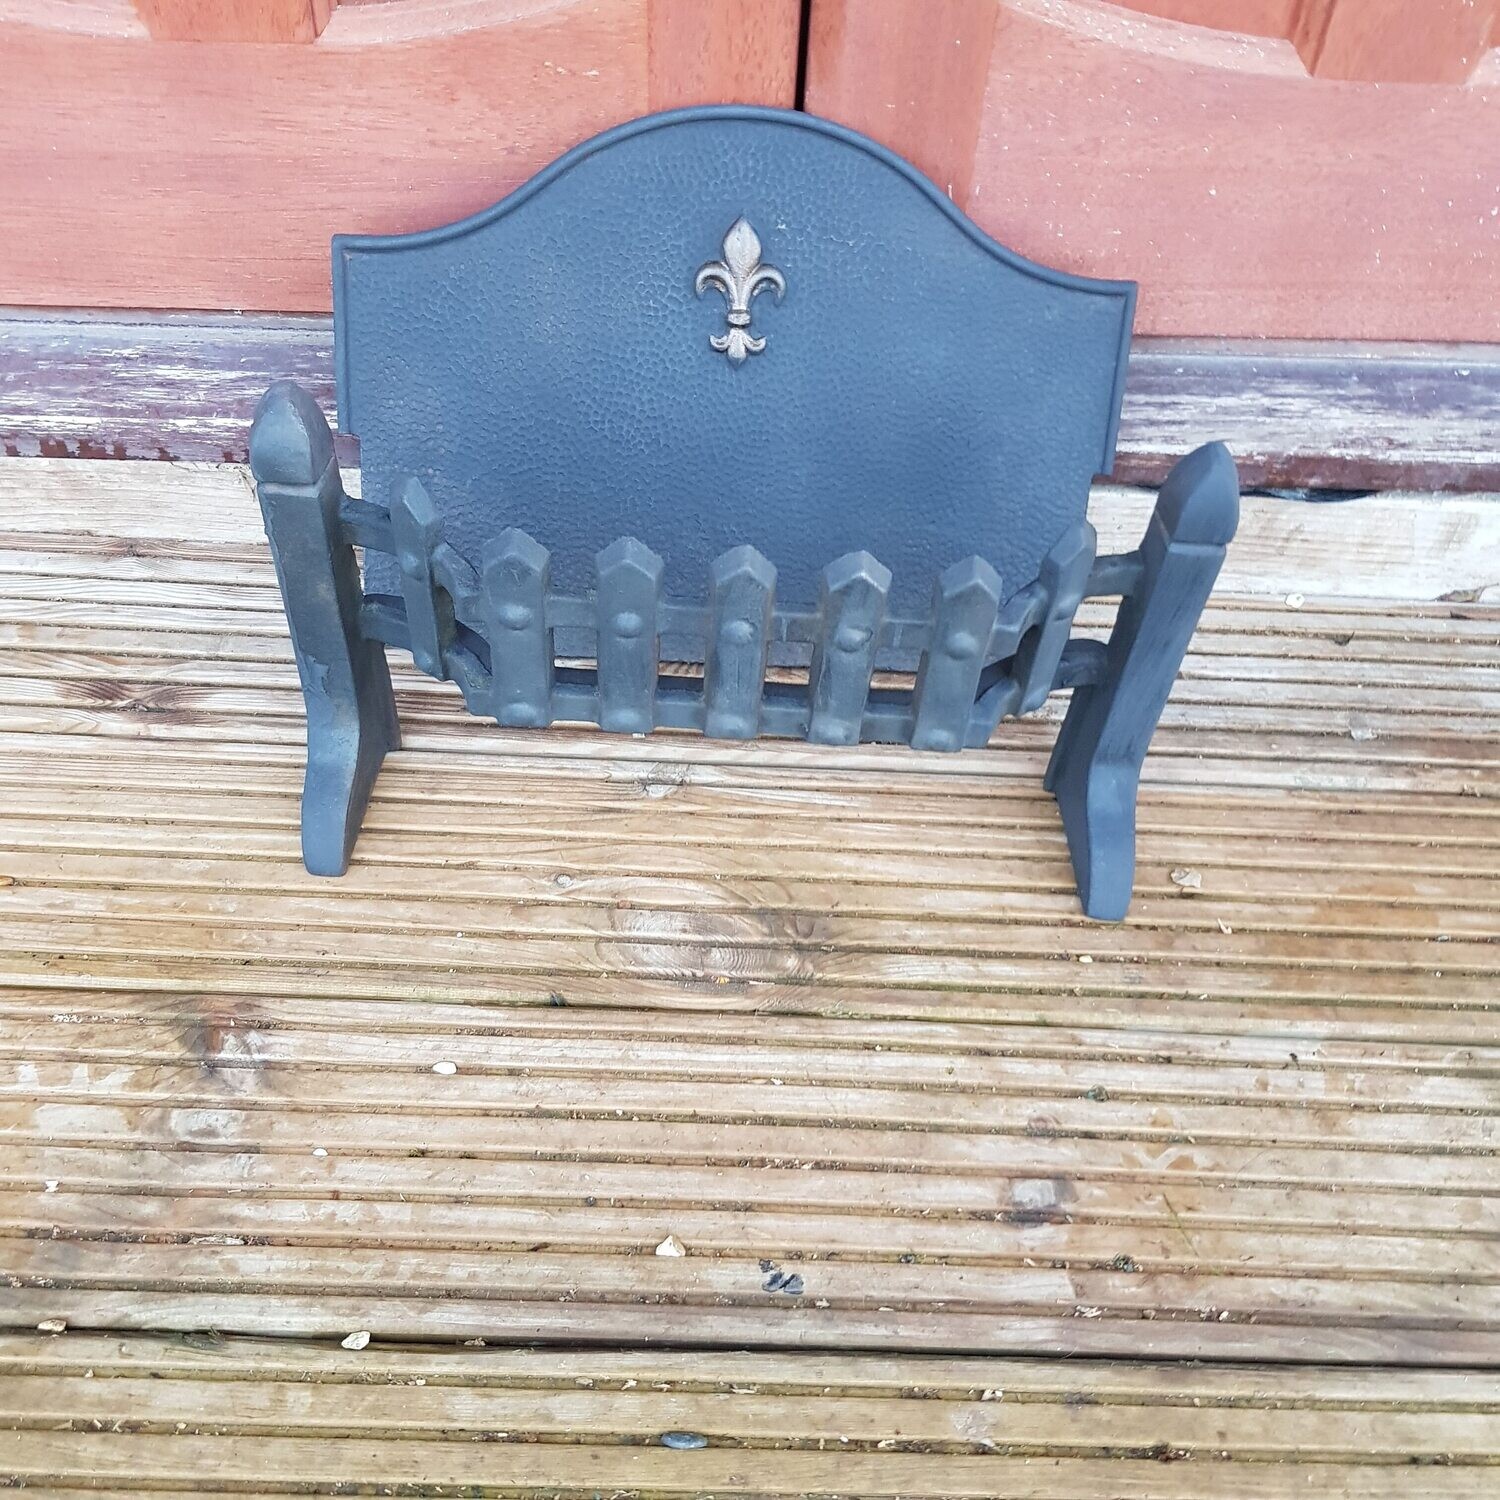 Refurbished Fireplaces and Grates